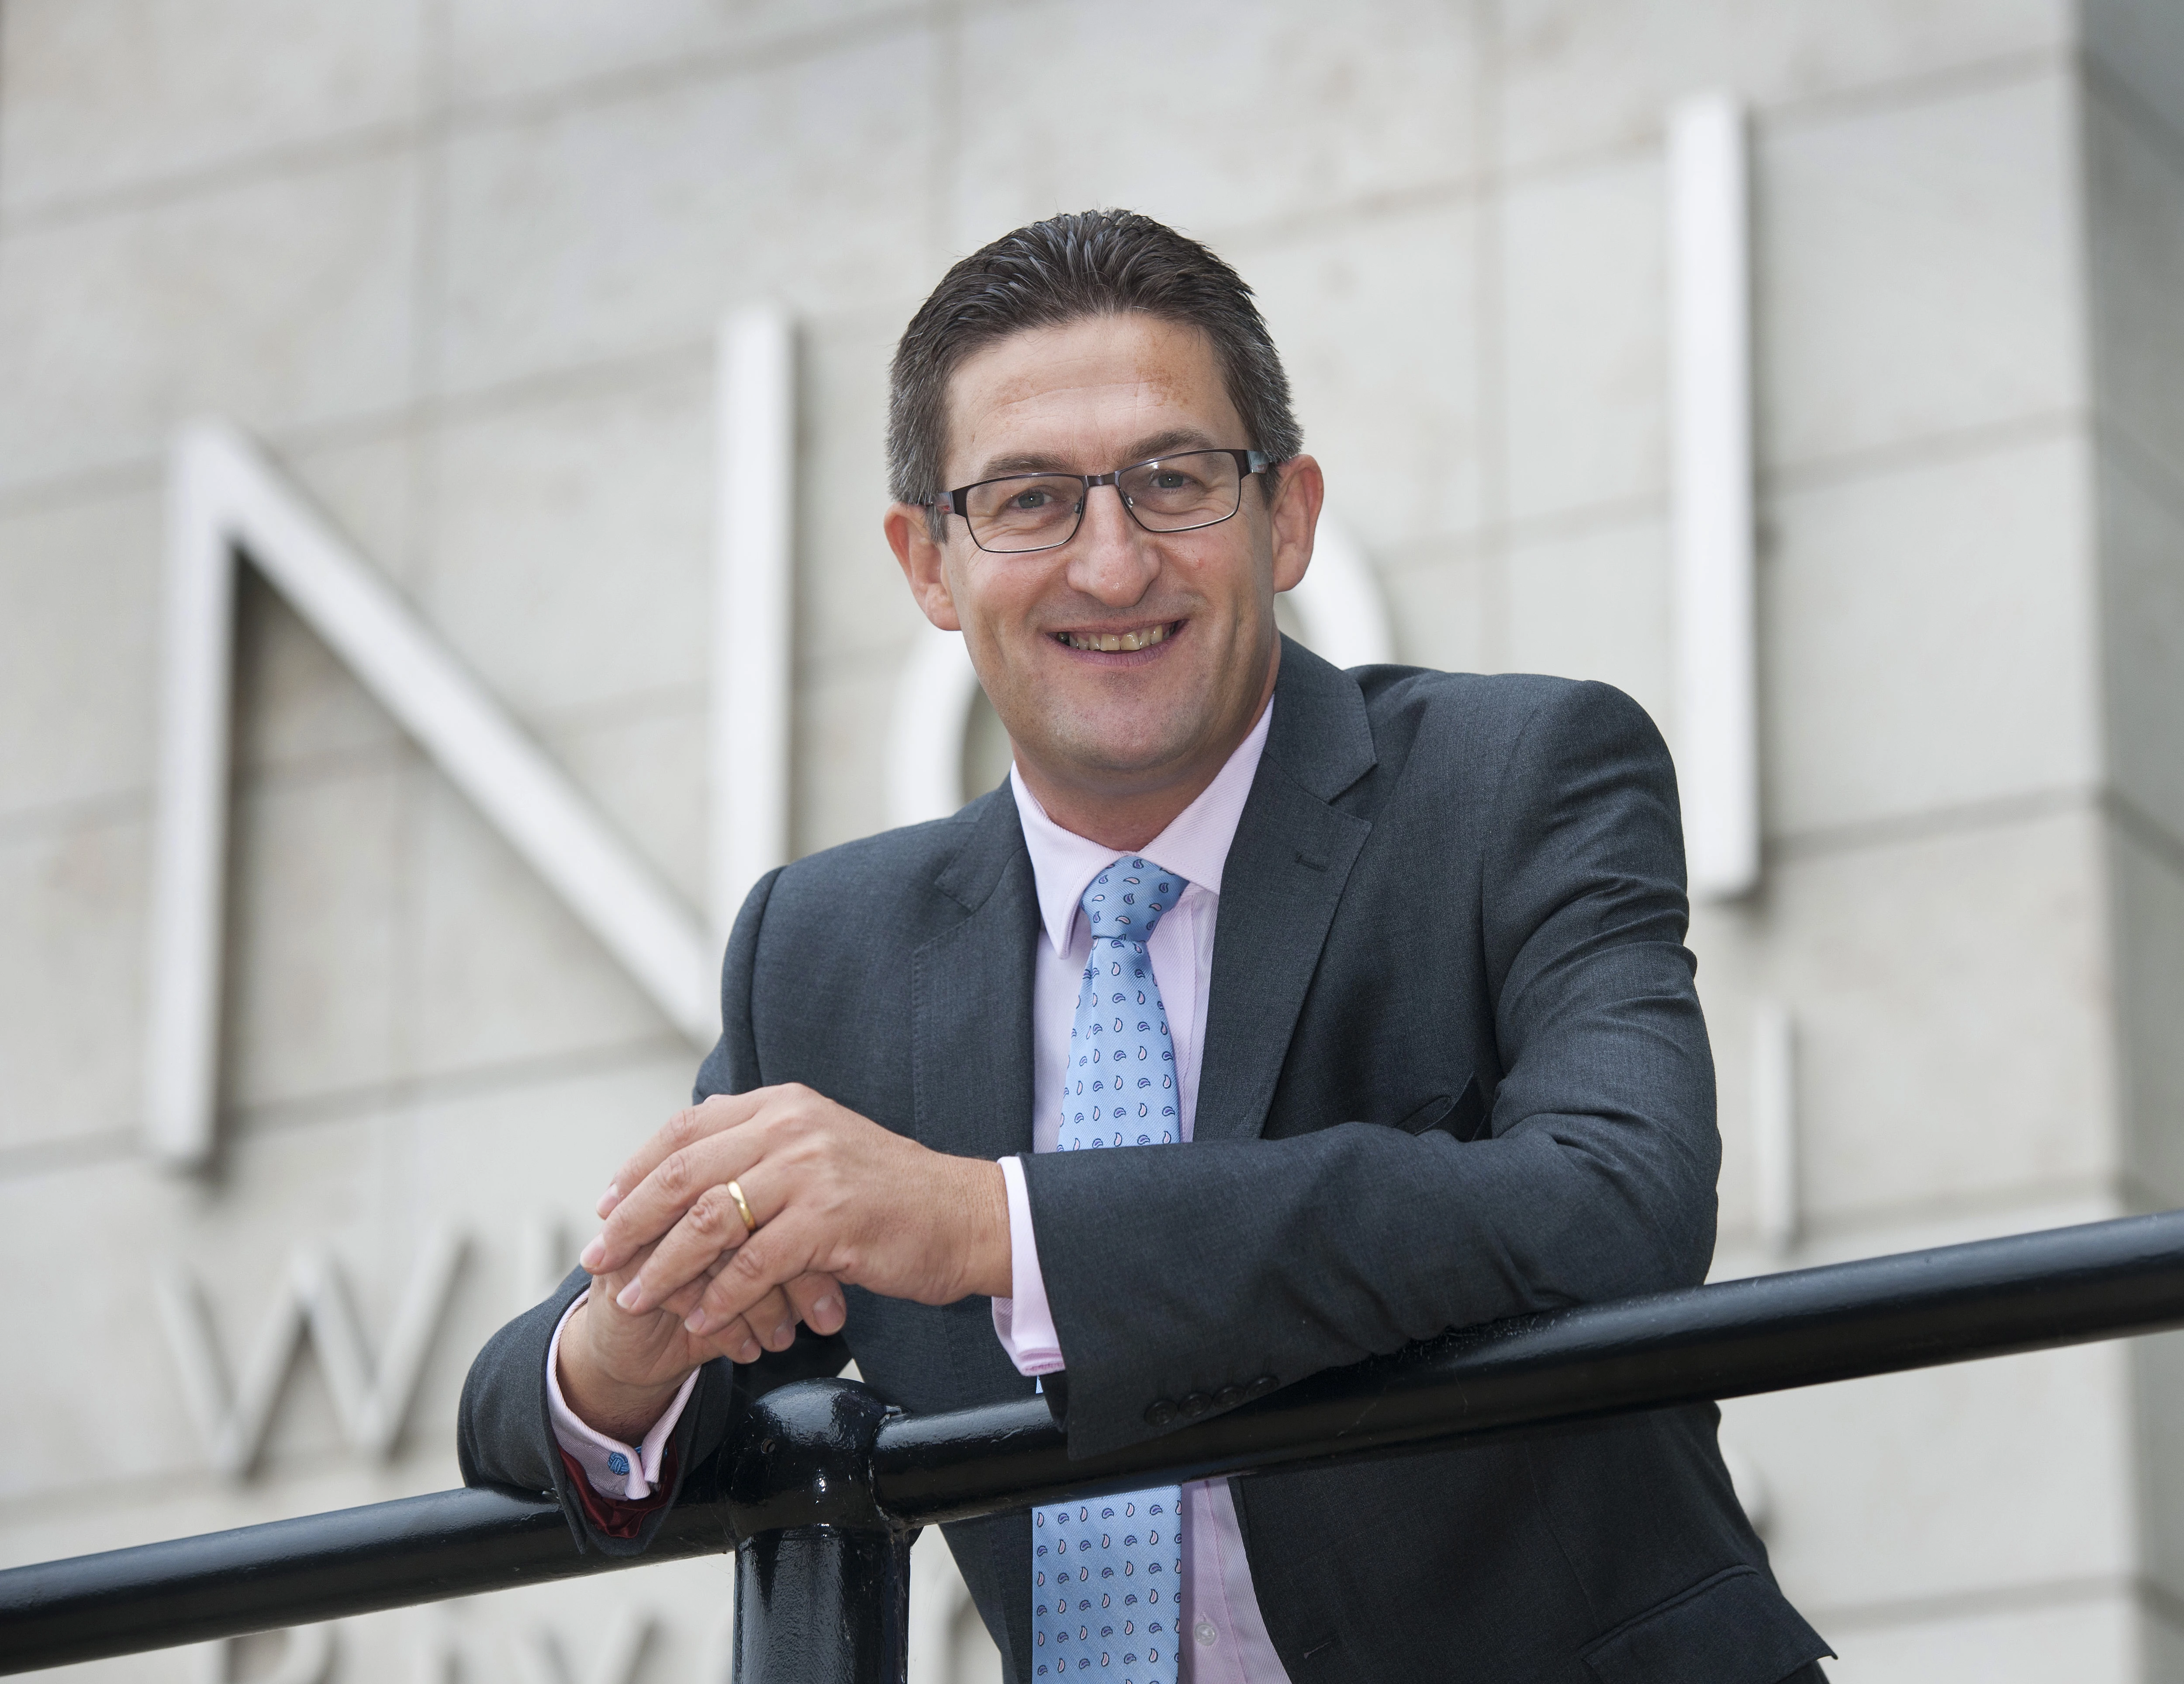 Andy Wood, Head of Regions, Mid Market, and Yorkshire Managing Partner at Grant Thornton UK LLP